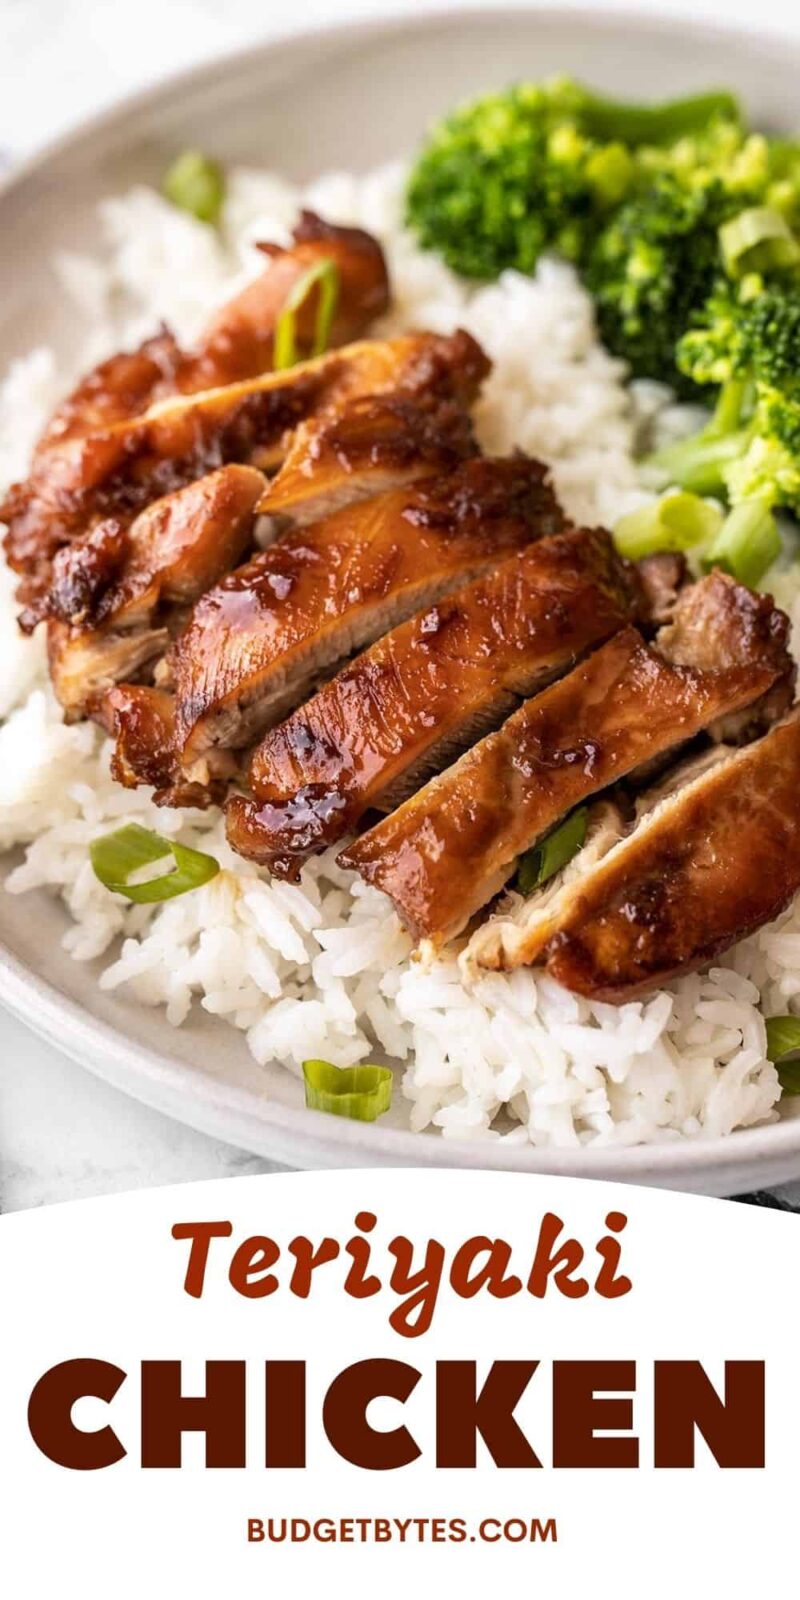 Close up side view of sliced teriyaki chicken on a bed of rice with broccoli.